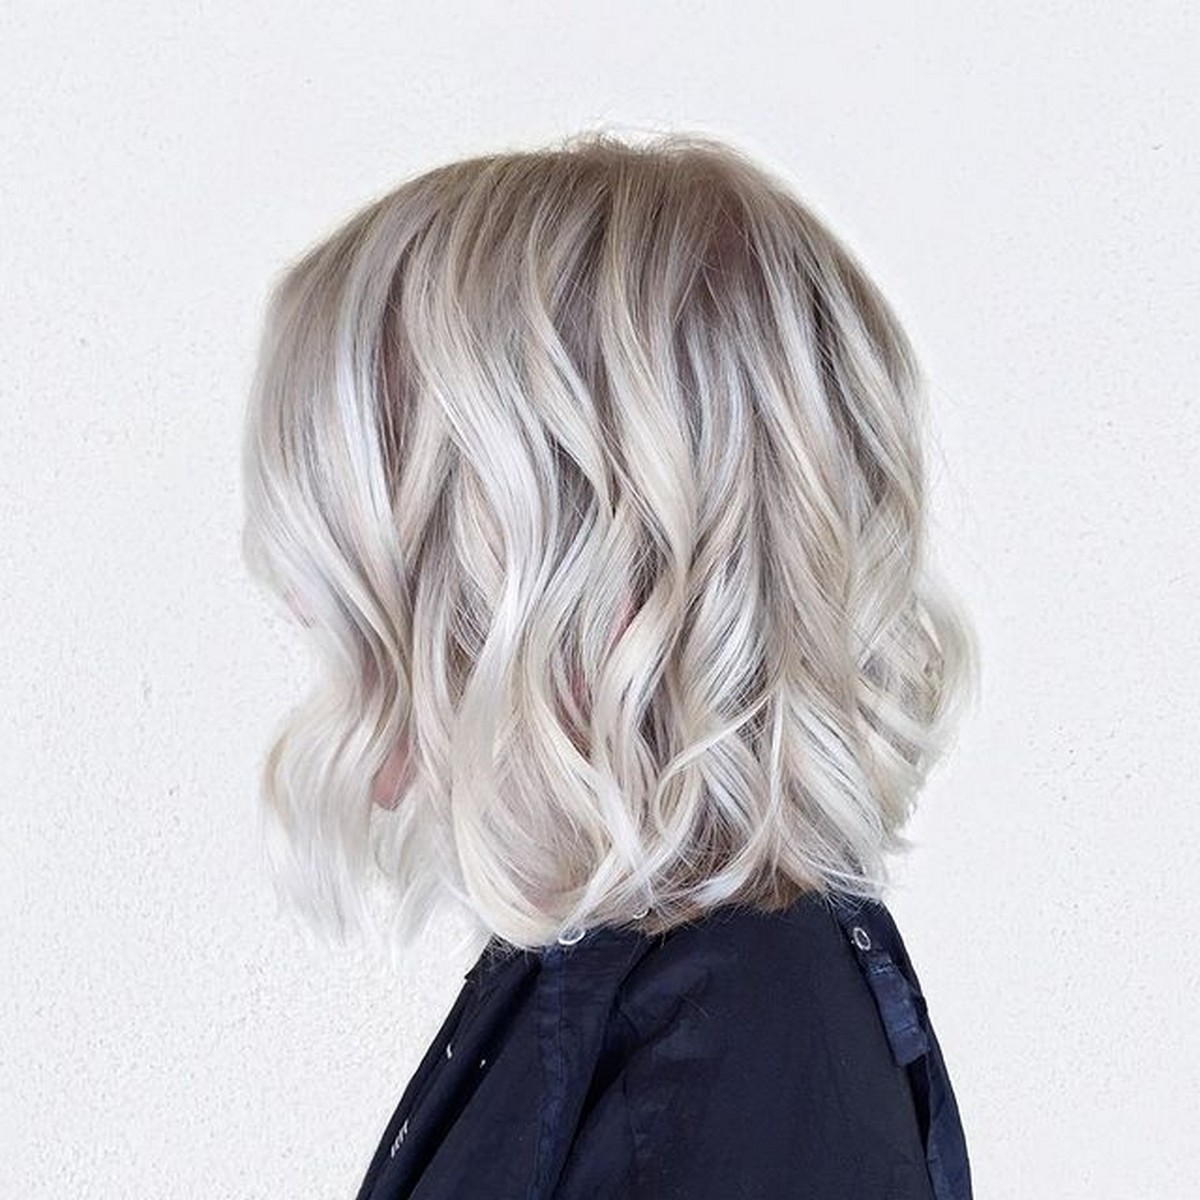 Icy Blonde Bob With Waves